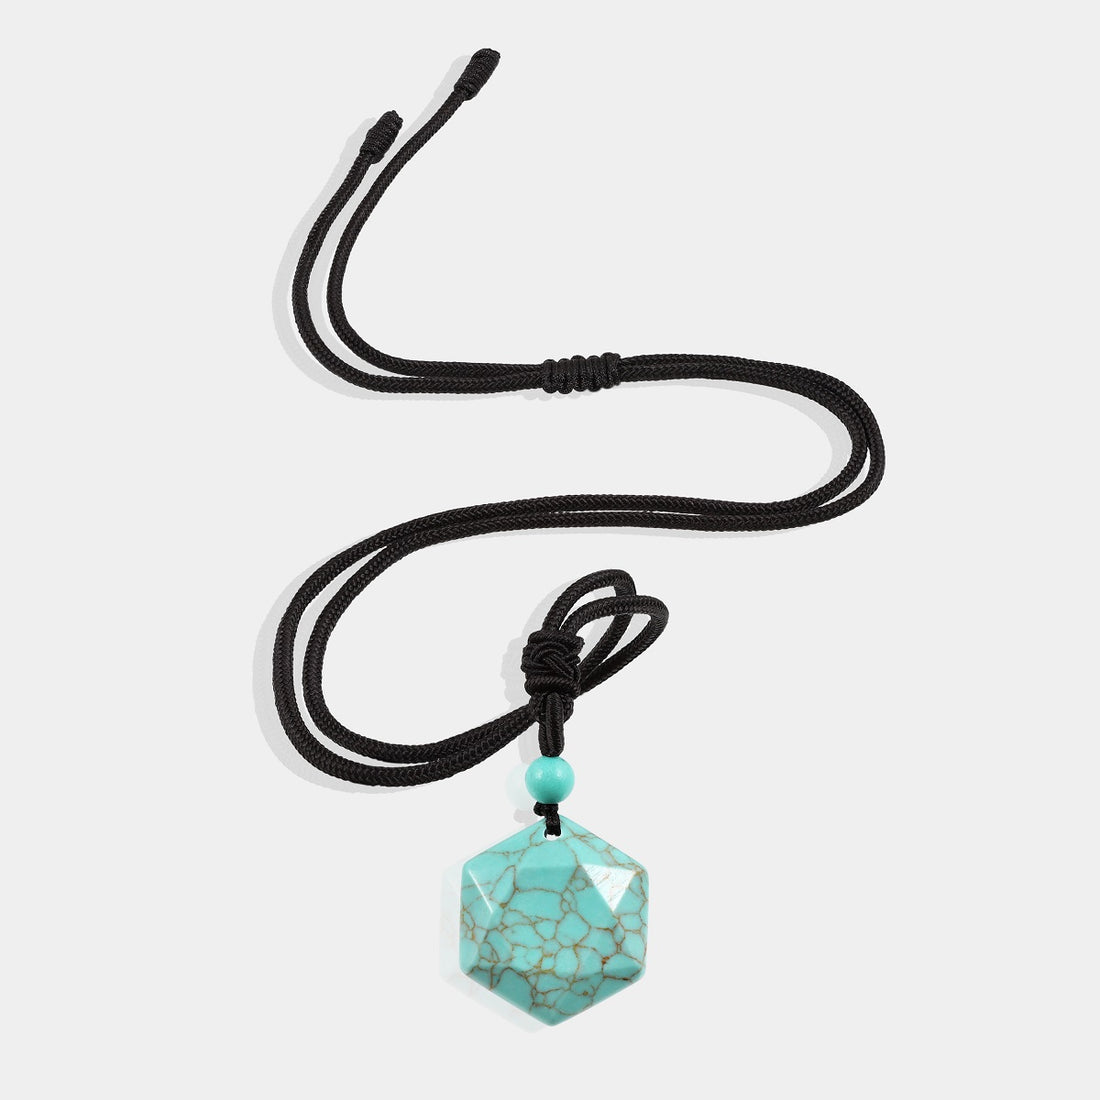 A stunning pendant necklace featuring a natural turquoise gemstone in a hexagon-cut, wrapped in an intricate design.